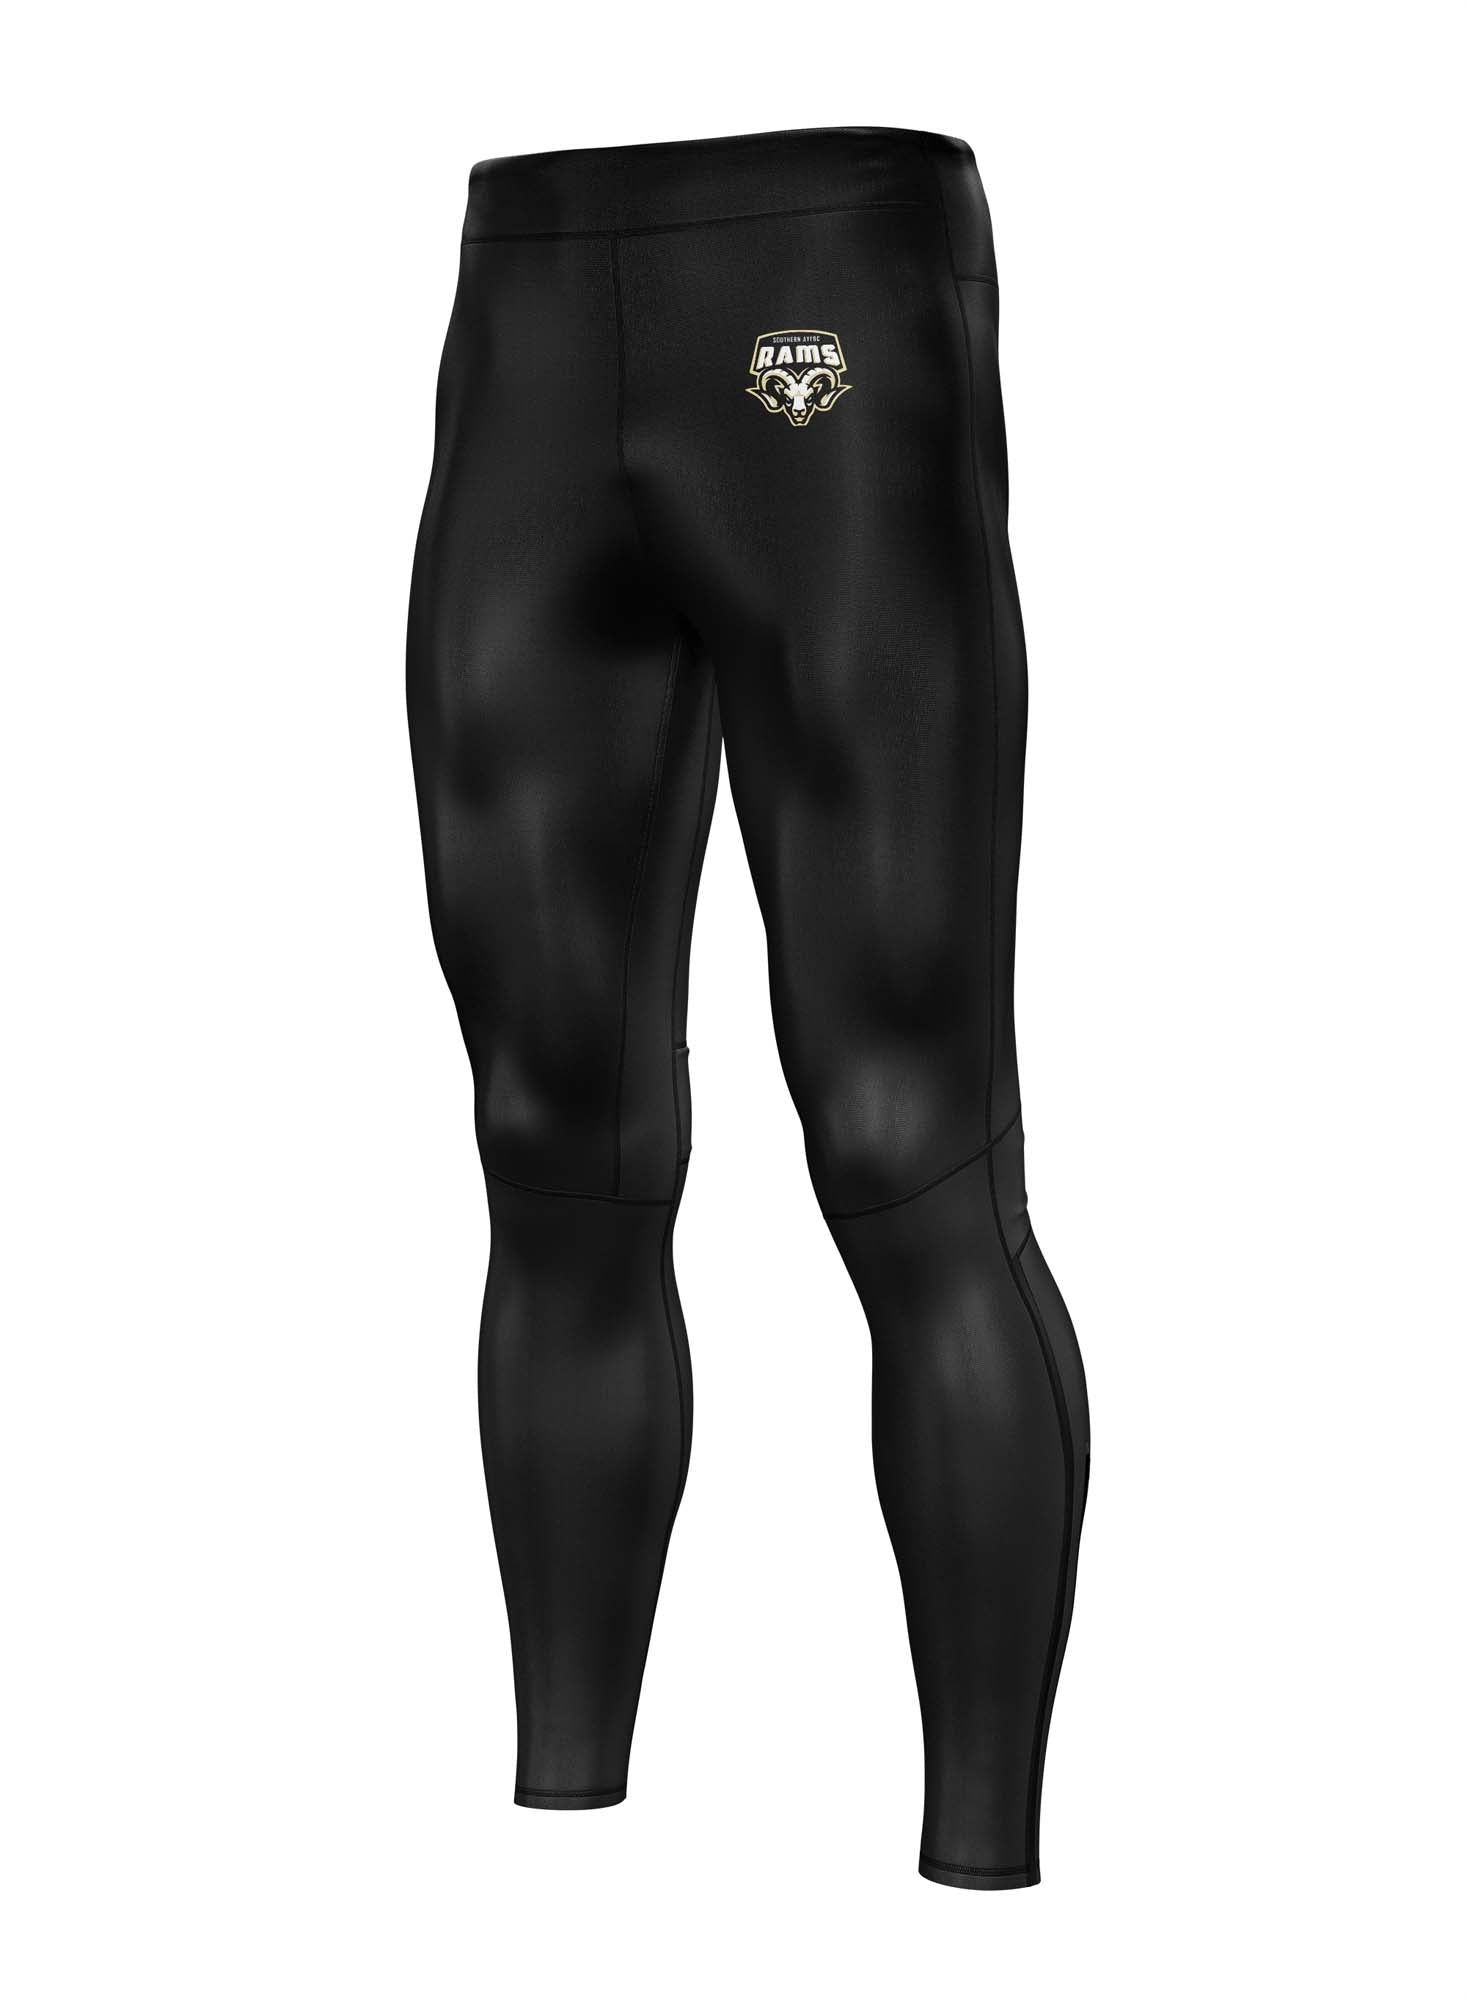 SOUTHERN RAMS Sublimated Tights - Men